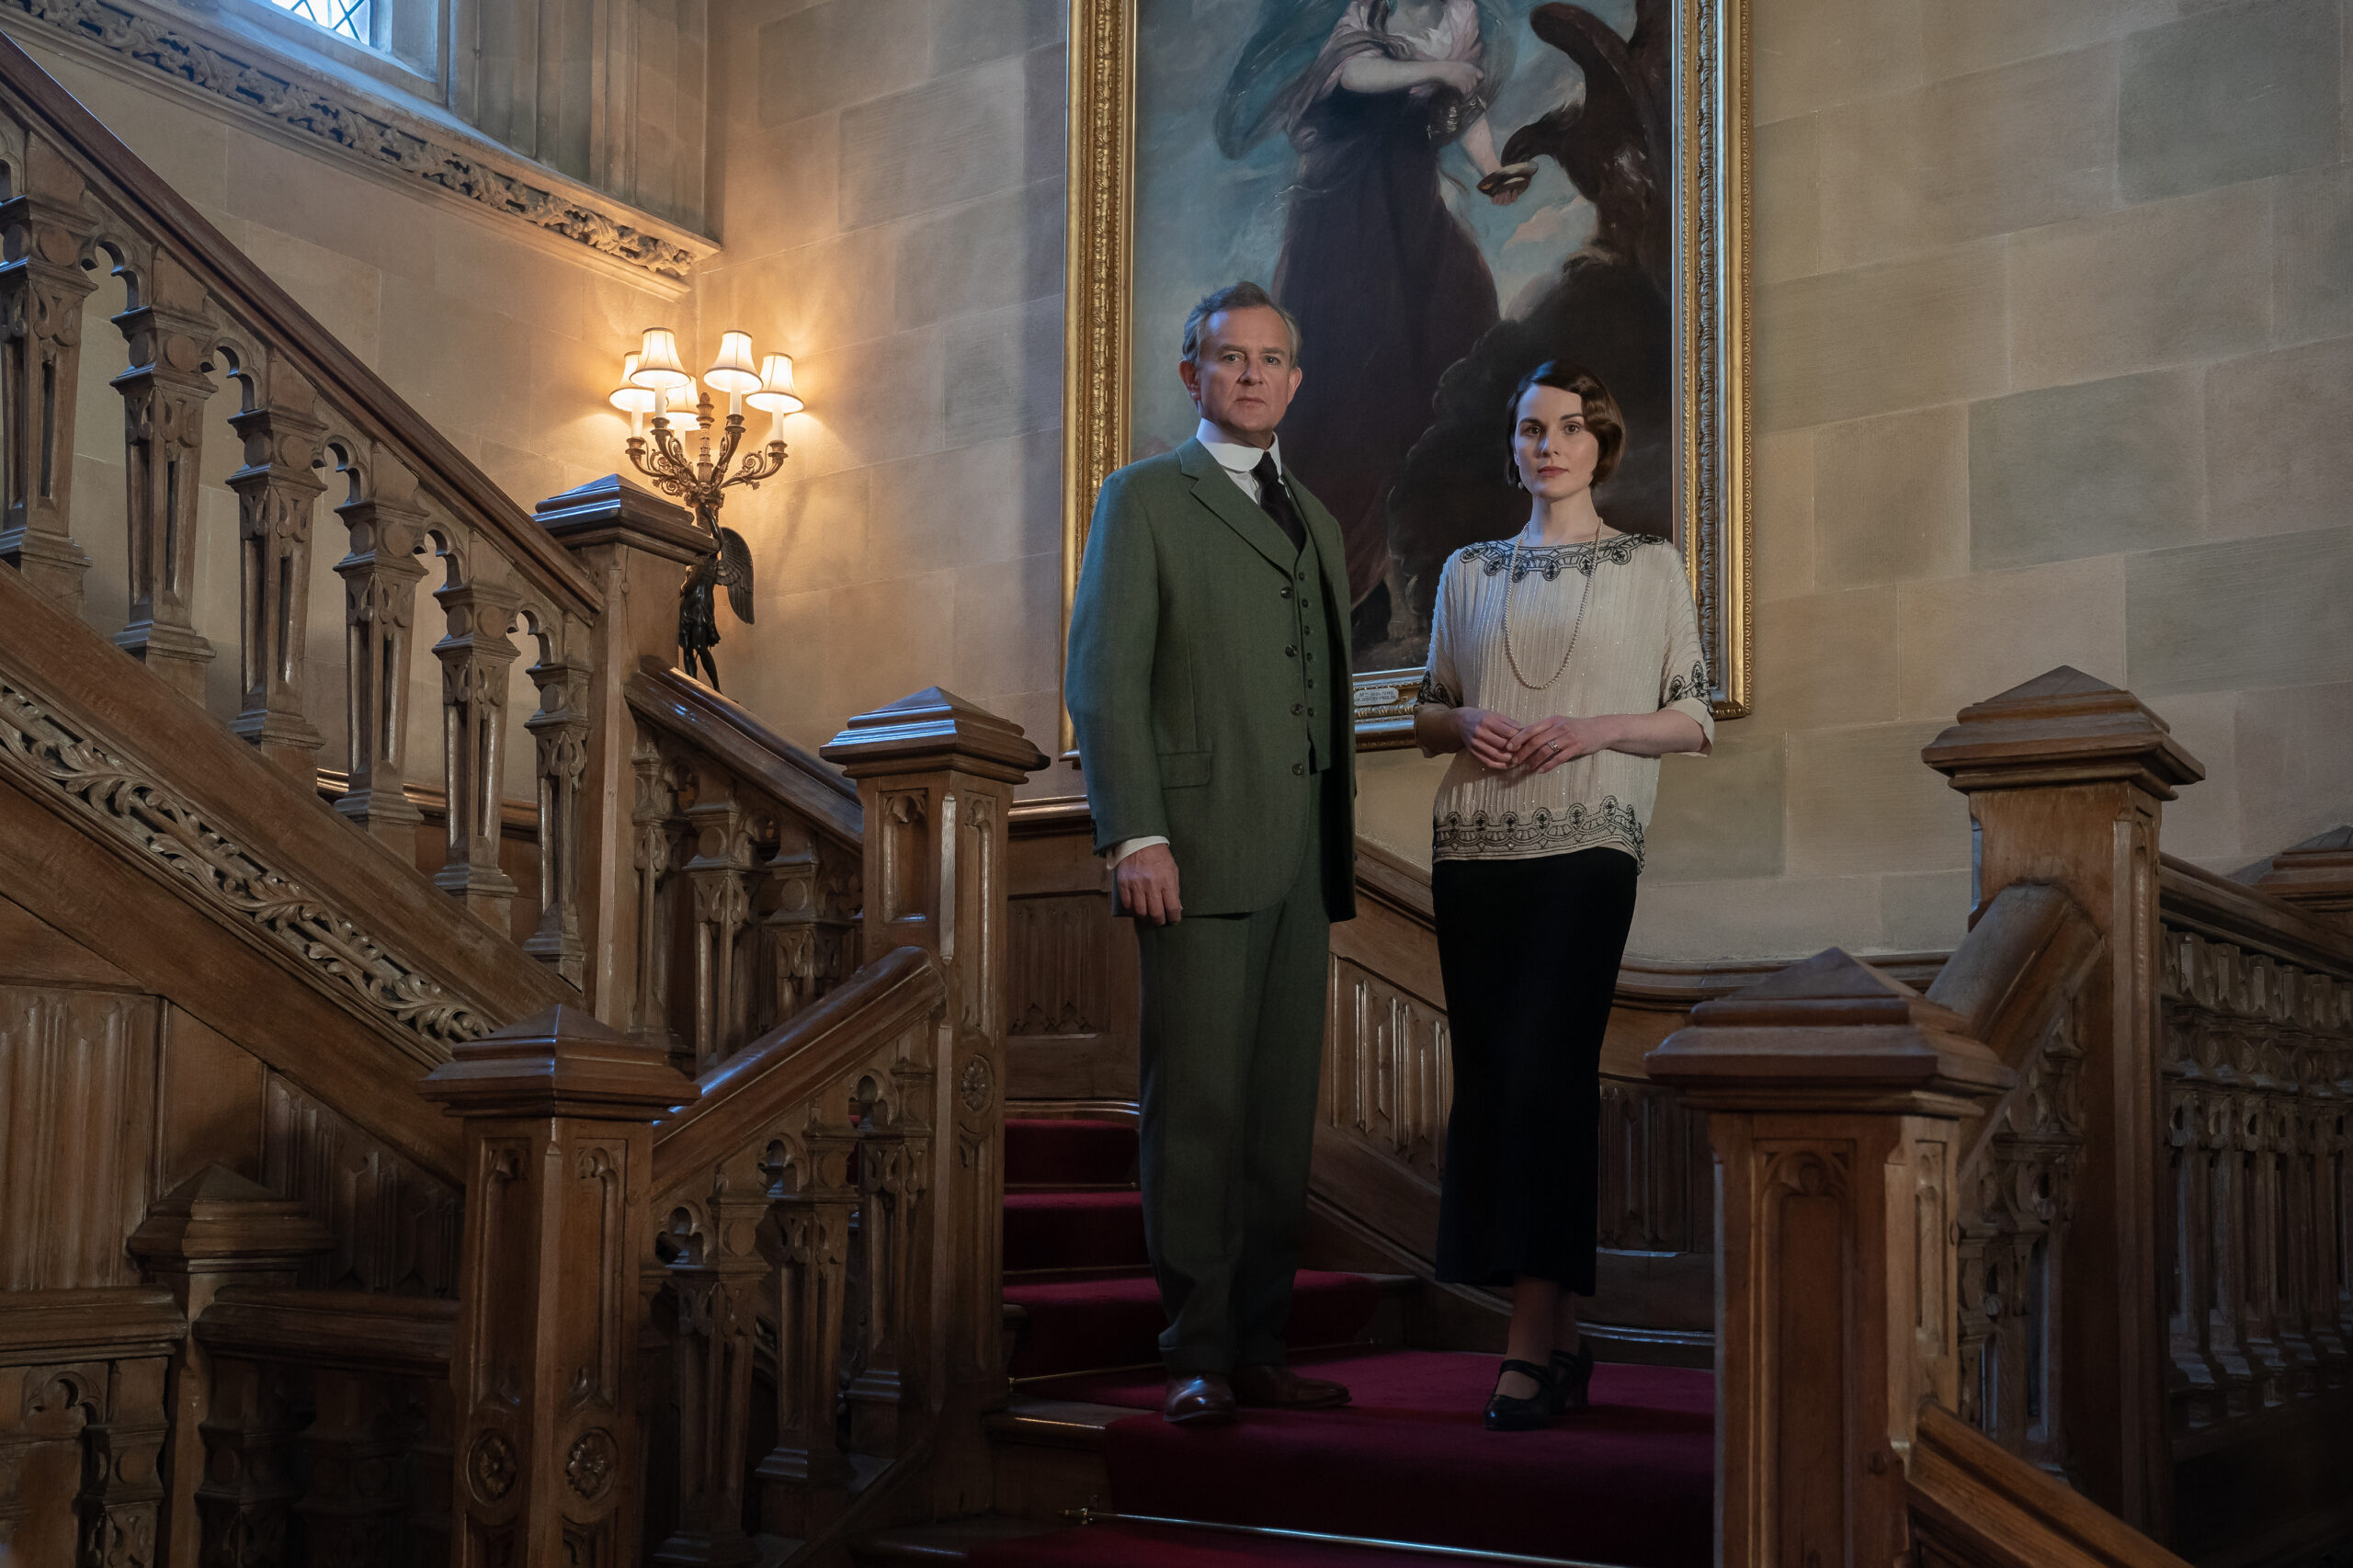 Downton Abbey 2: First Look Images